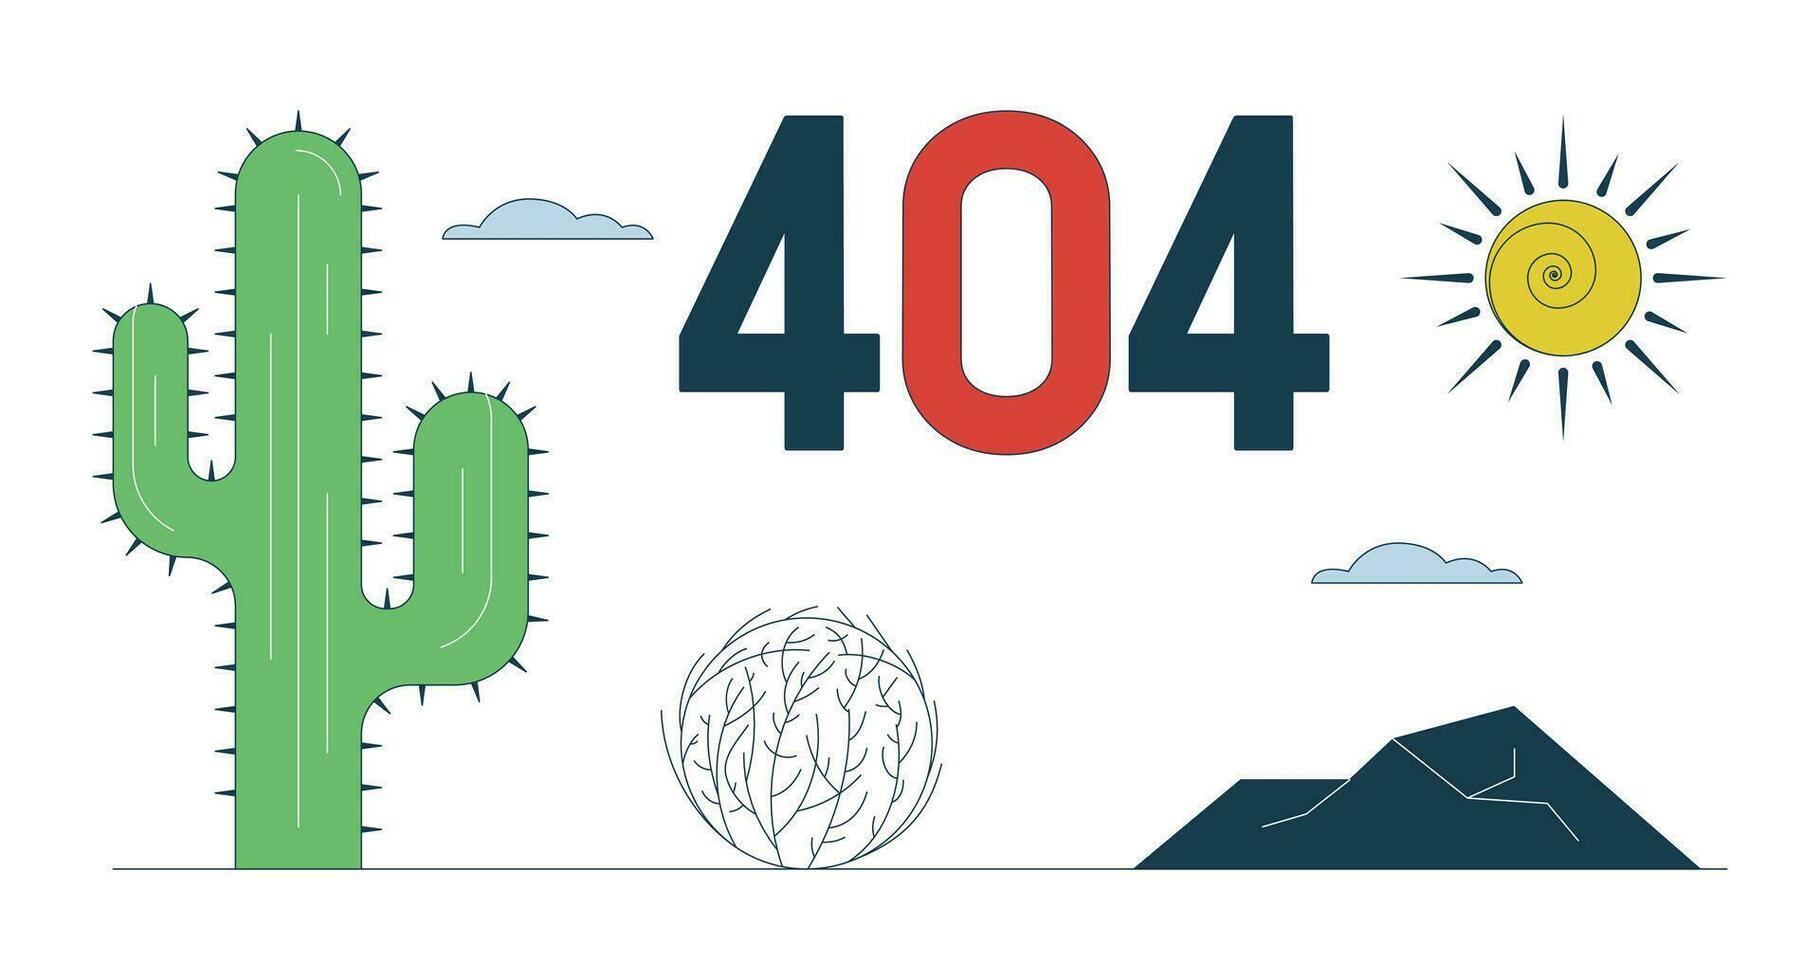 Desert wasteland with cactus error 404 flash message. Tumbleweed rolling on road. Empty state ui design. Page not found popup cartoon image. Vector flat illustration concept on white background